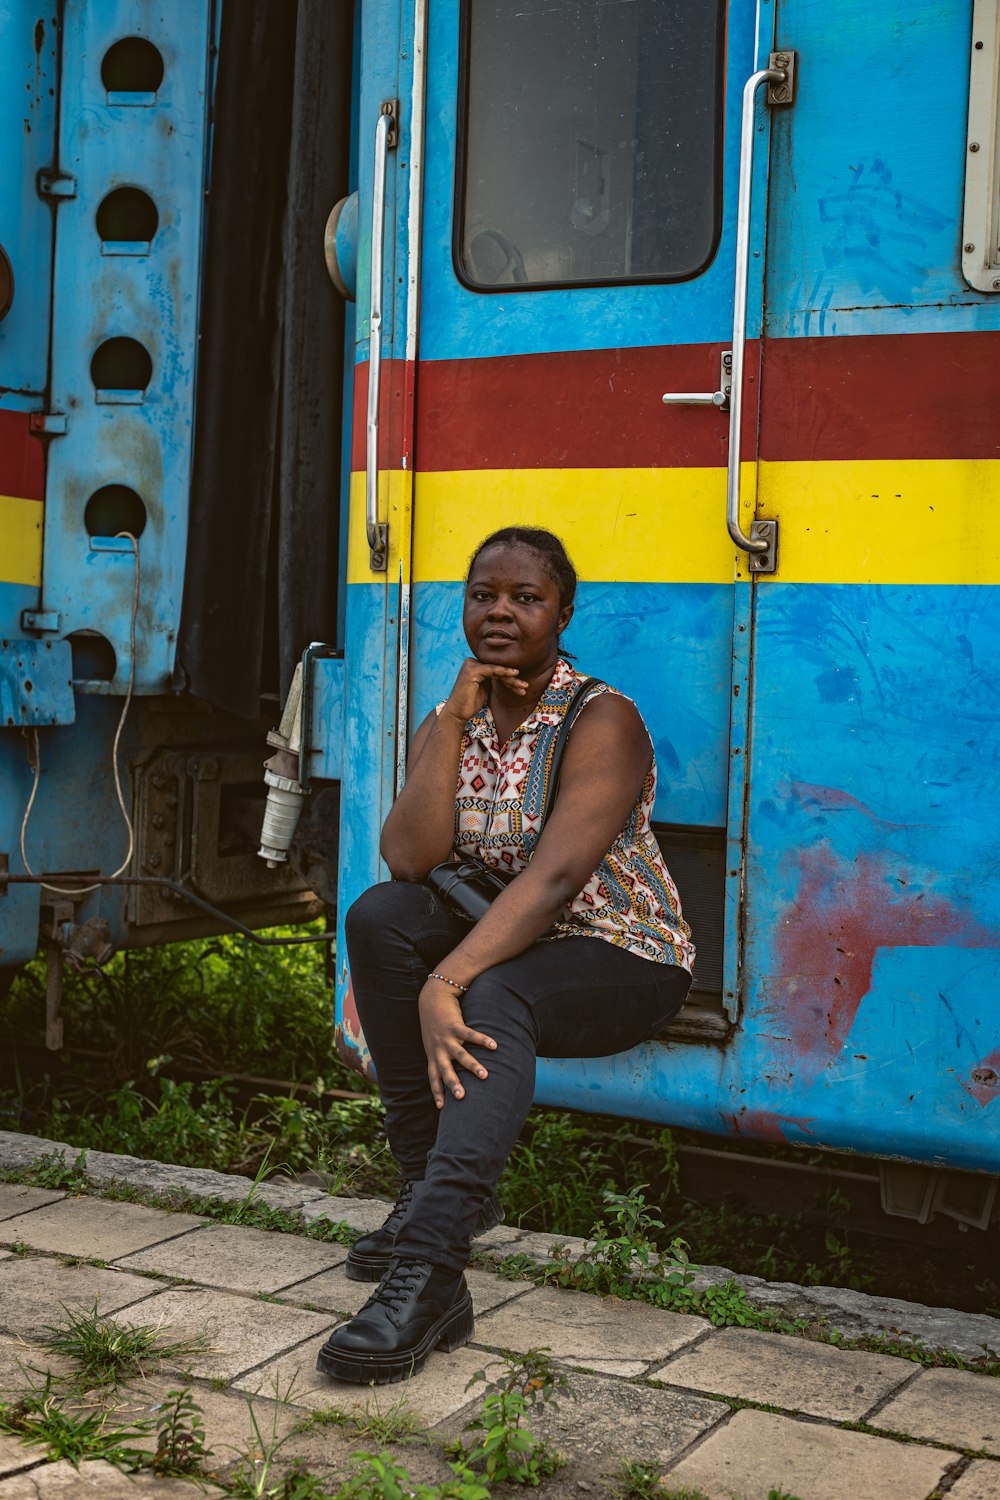 a woman sitting on the side of a train